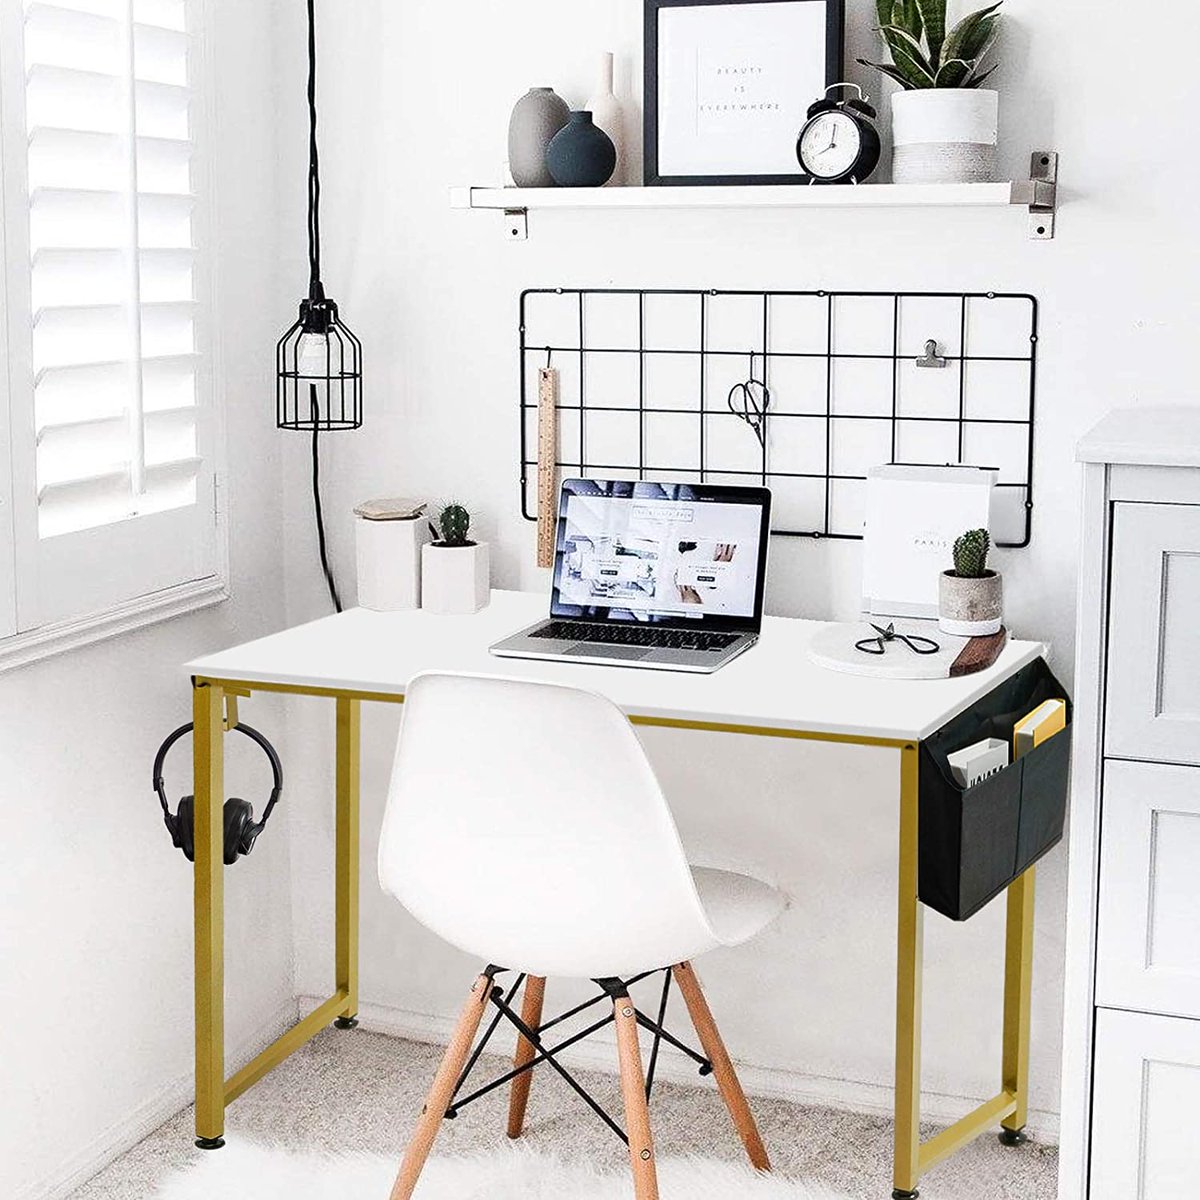 Check out the best small office desks for your space! These desks are perfect for small offices and won't break the bank.

makingtimetoday.com/best-small-off…

#makingtimetoday #officedesk #workspaceinspiration #ProductivityBoost #InteriorDesignGoals #officeorganization #workfromhomelife